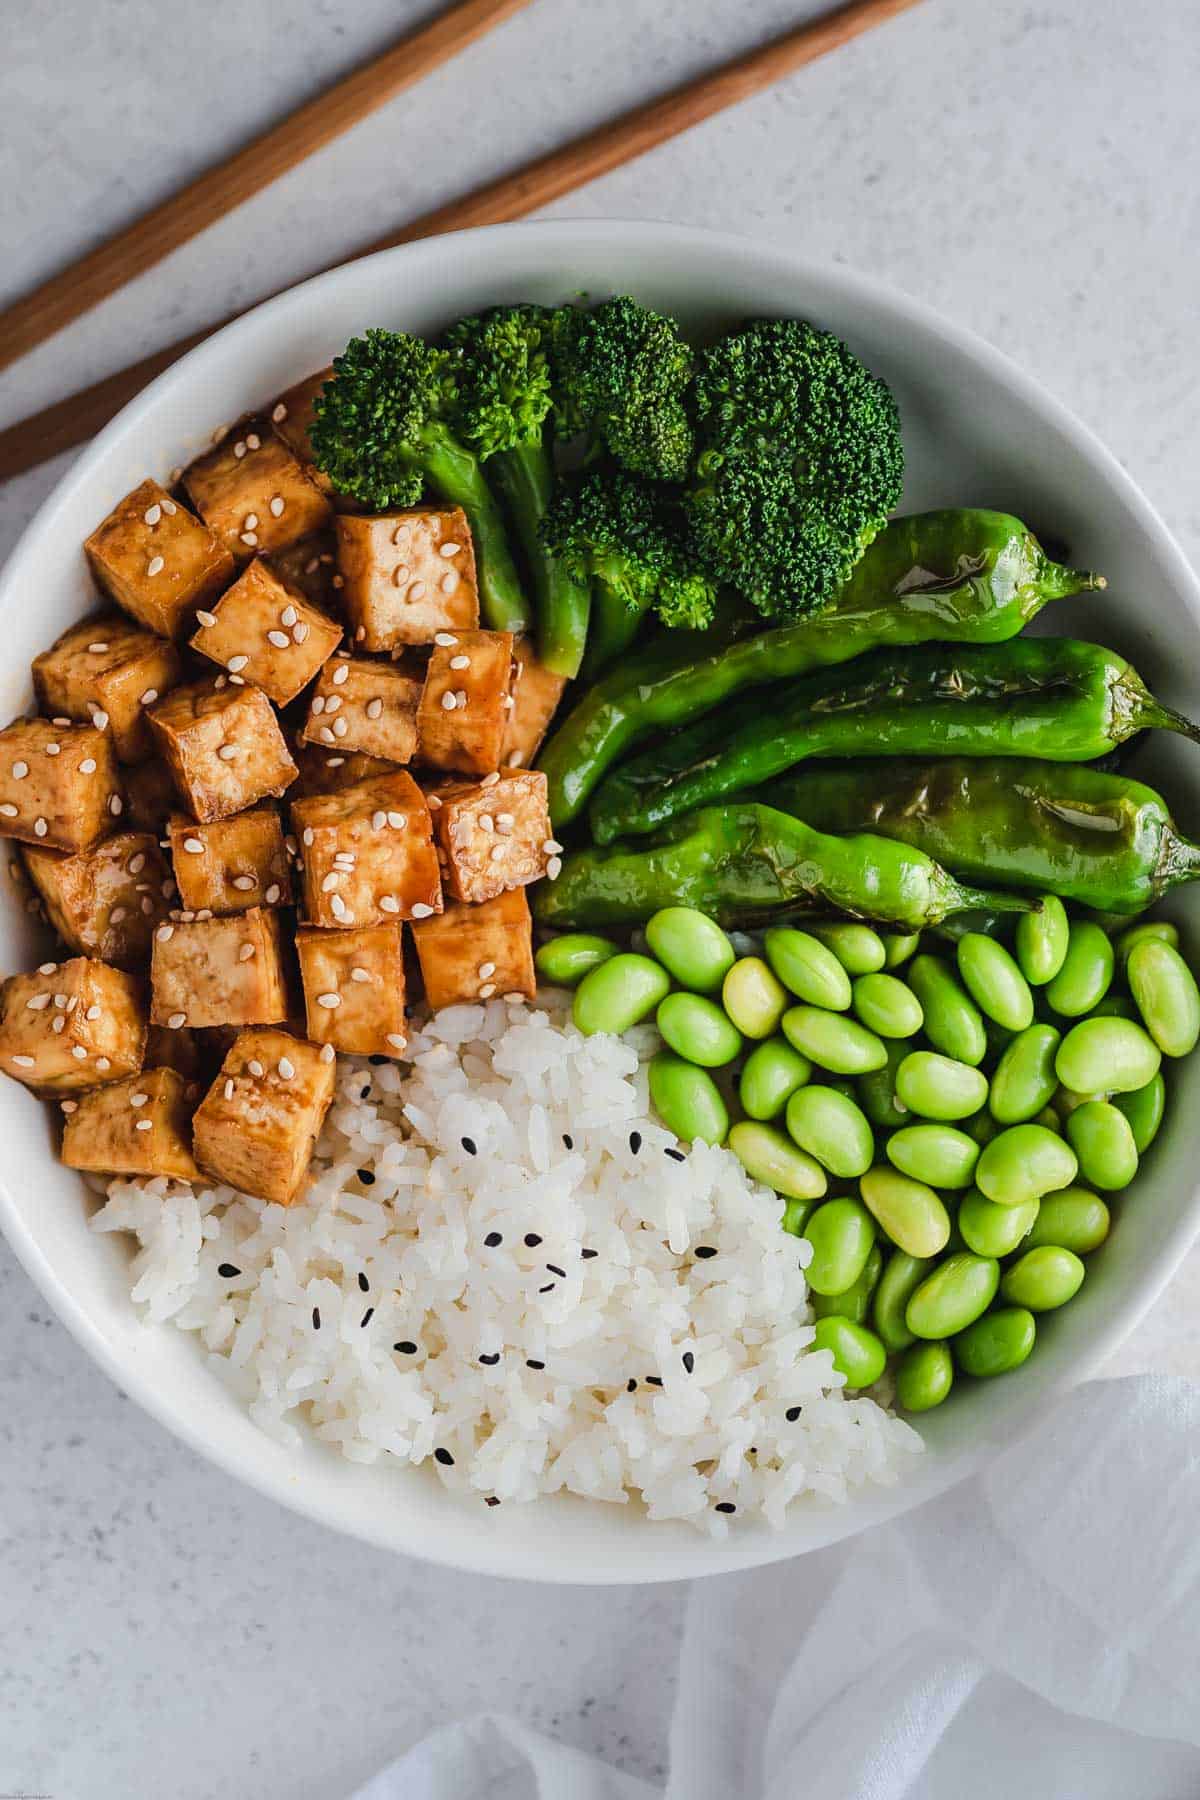 Crispy tofu cubes garnished with sesame seeds, white rice, shelled edamame, broccoli florets, and shishito peppers in a white bowl with bamboo chopsticks.